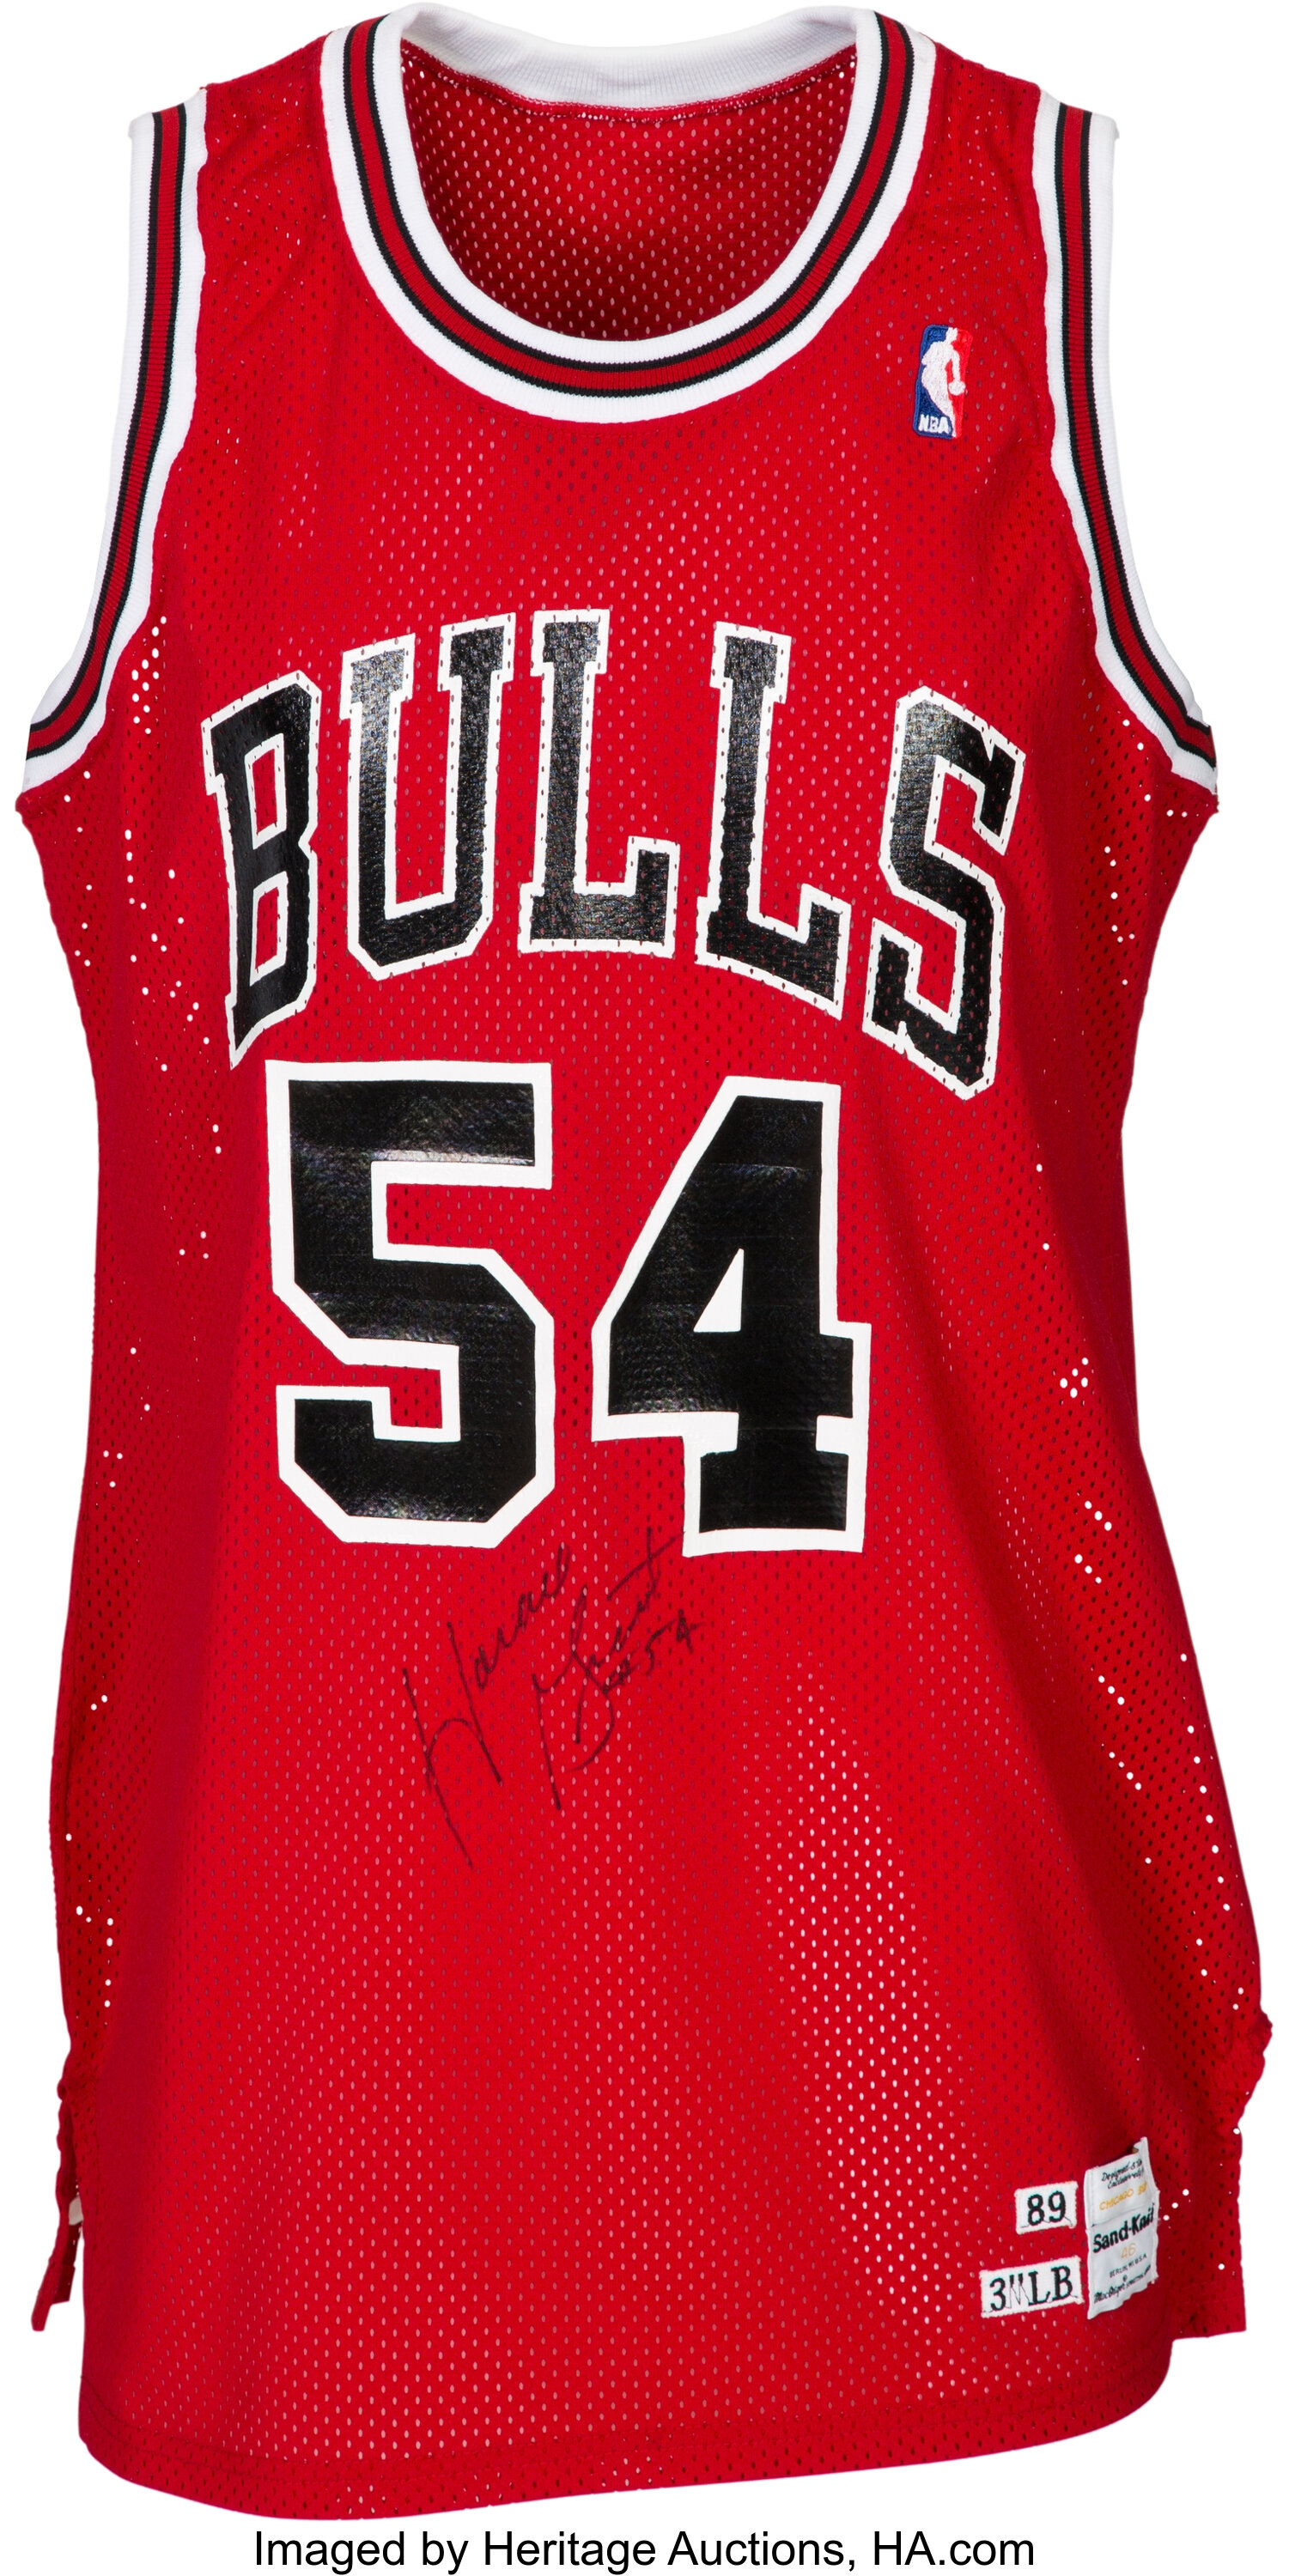 Chicago Bulls Jersey History - Basketball Jersey Archive